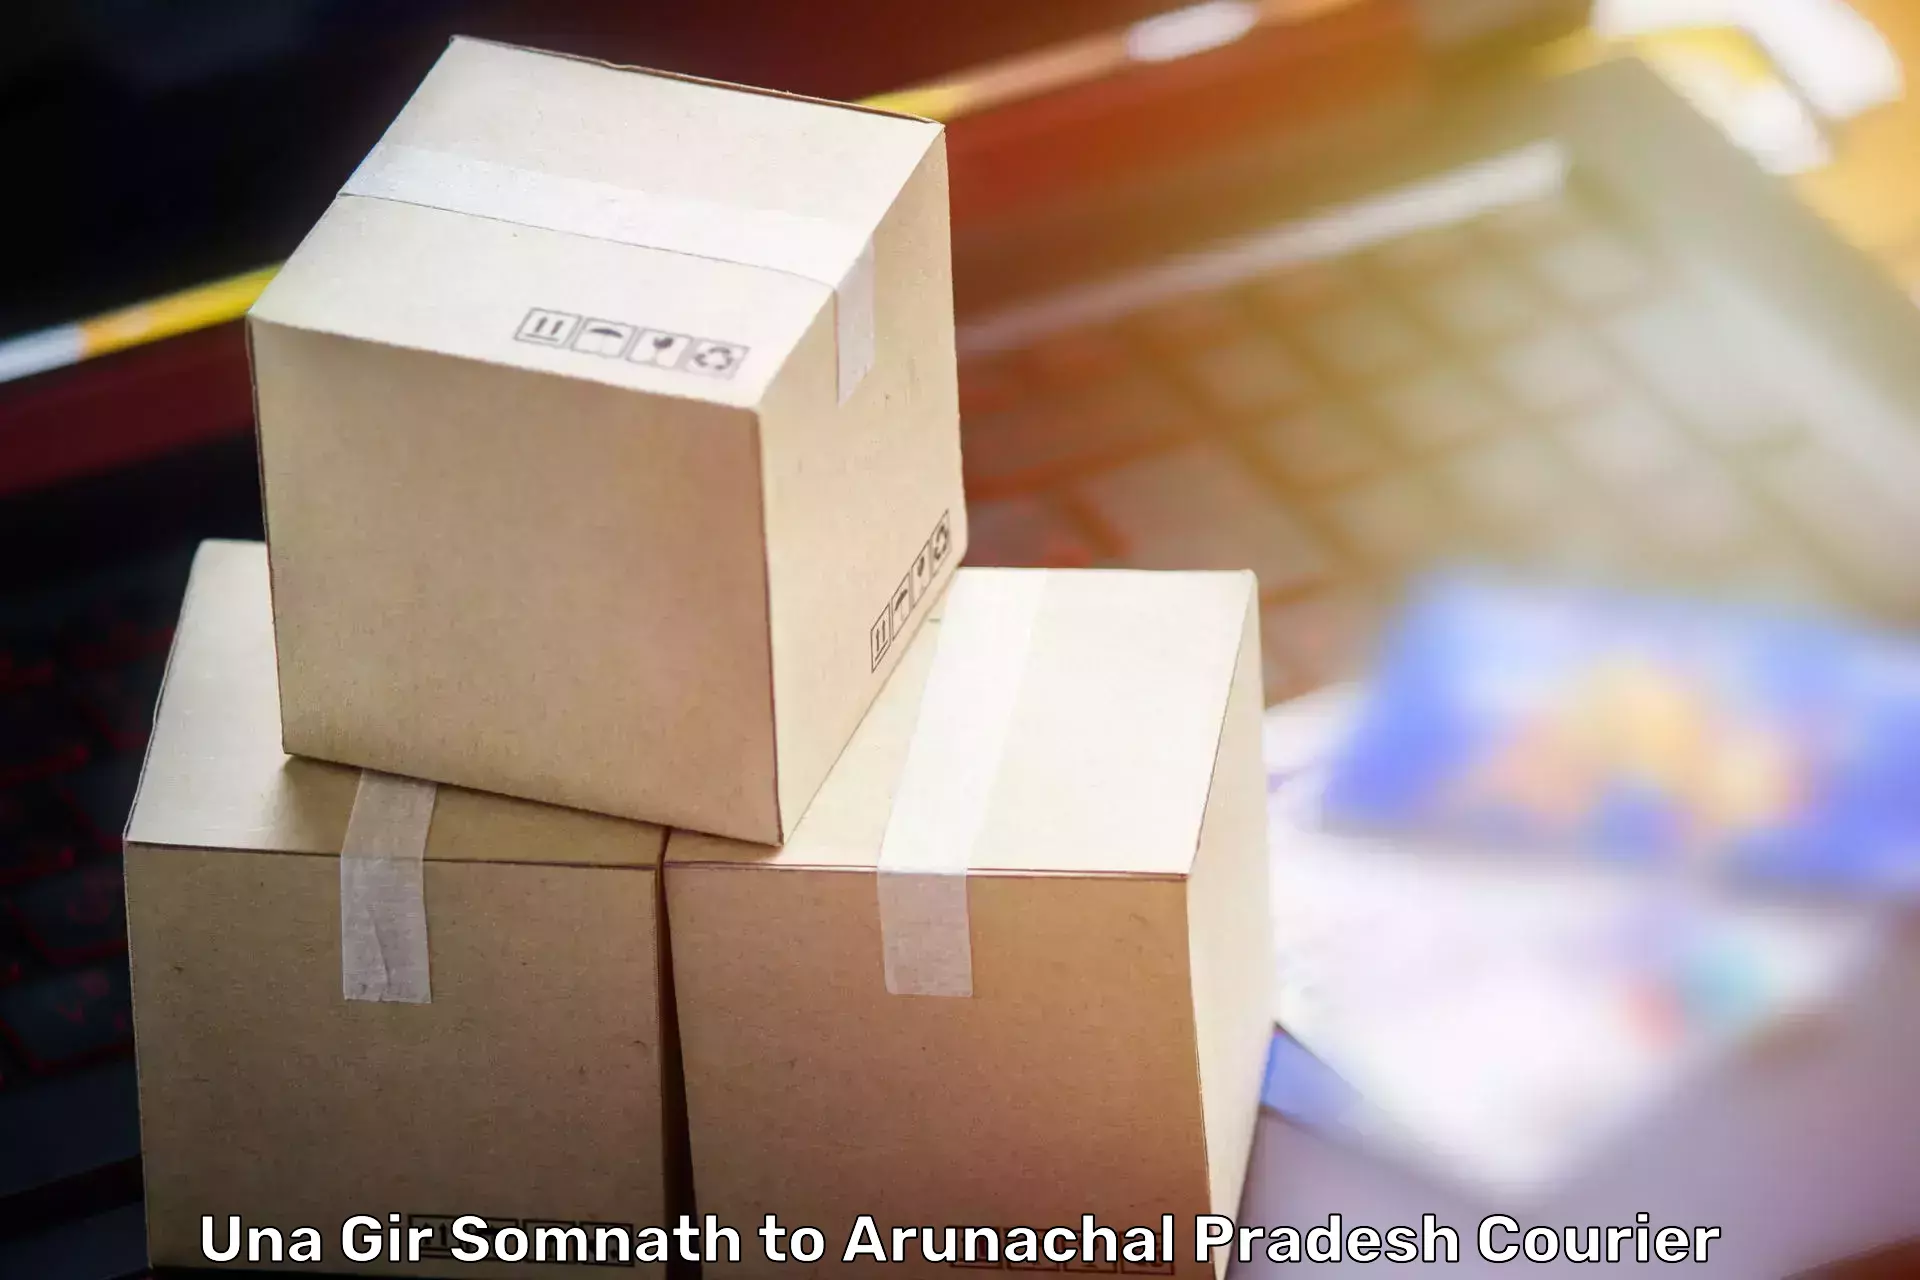 Trusted moving company Una Gir Somnath to Changlang